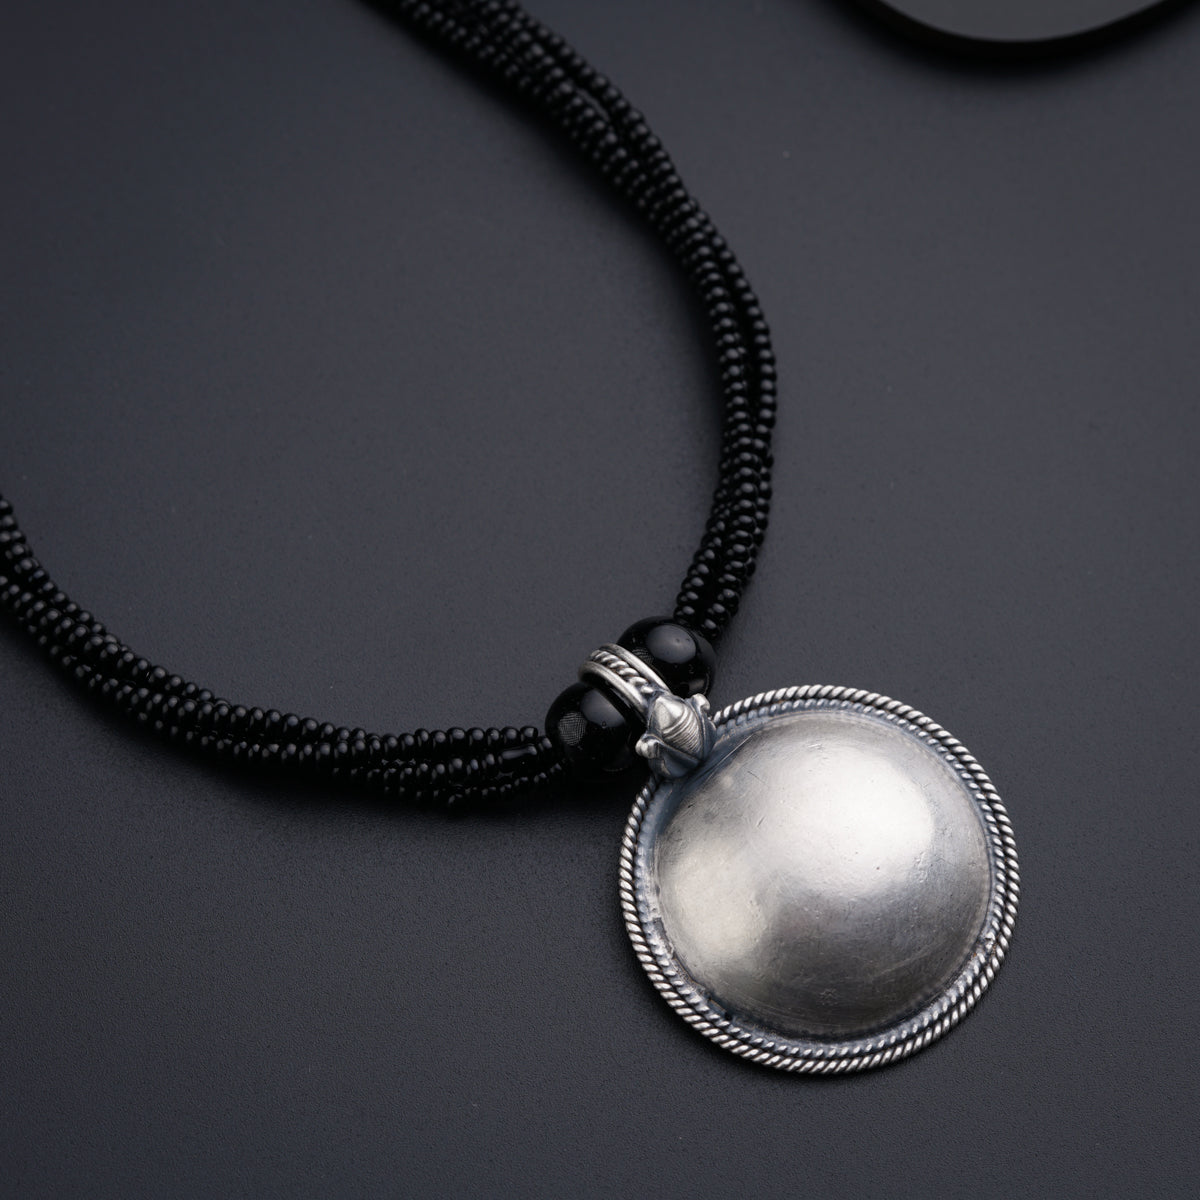 a necklace with a silver ball on a black background